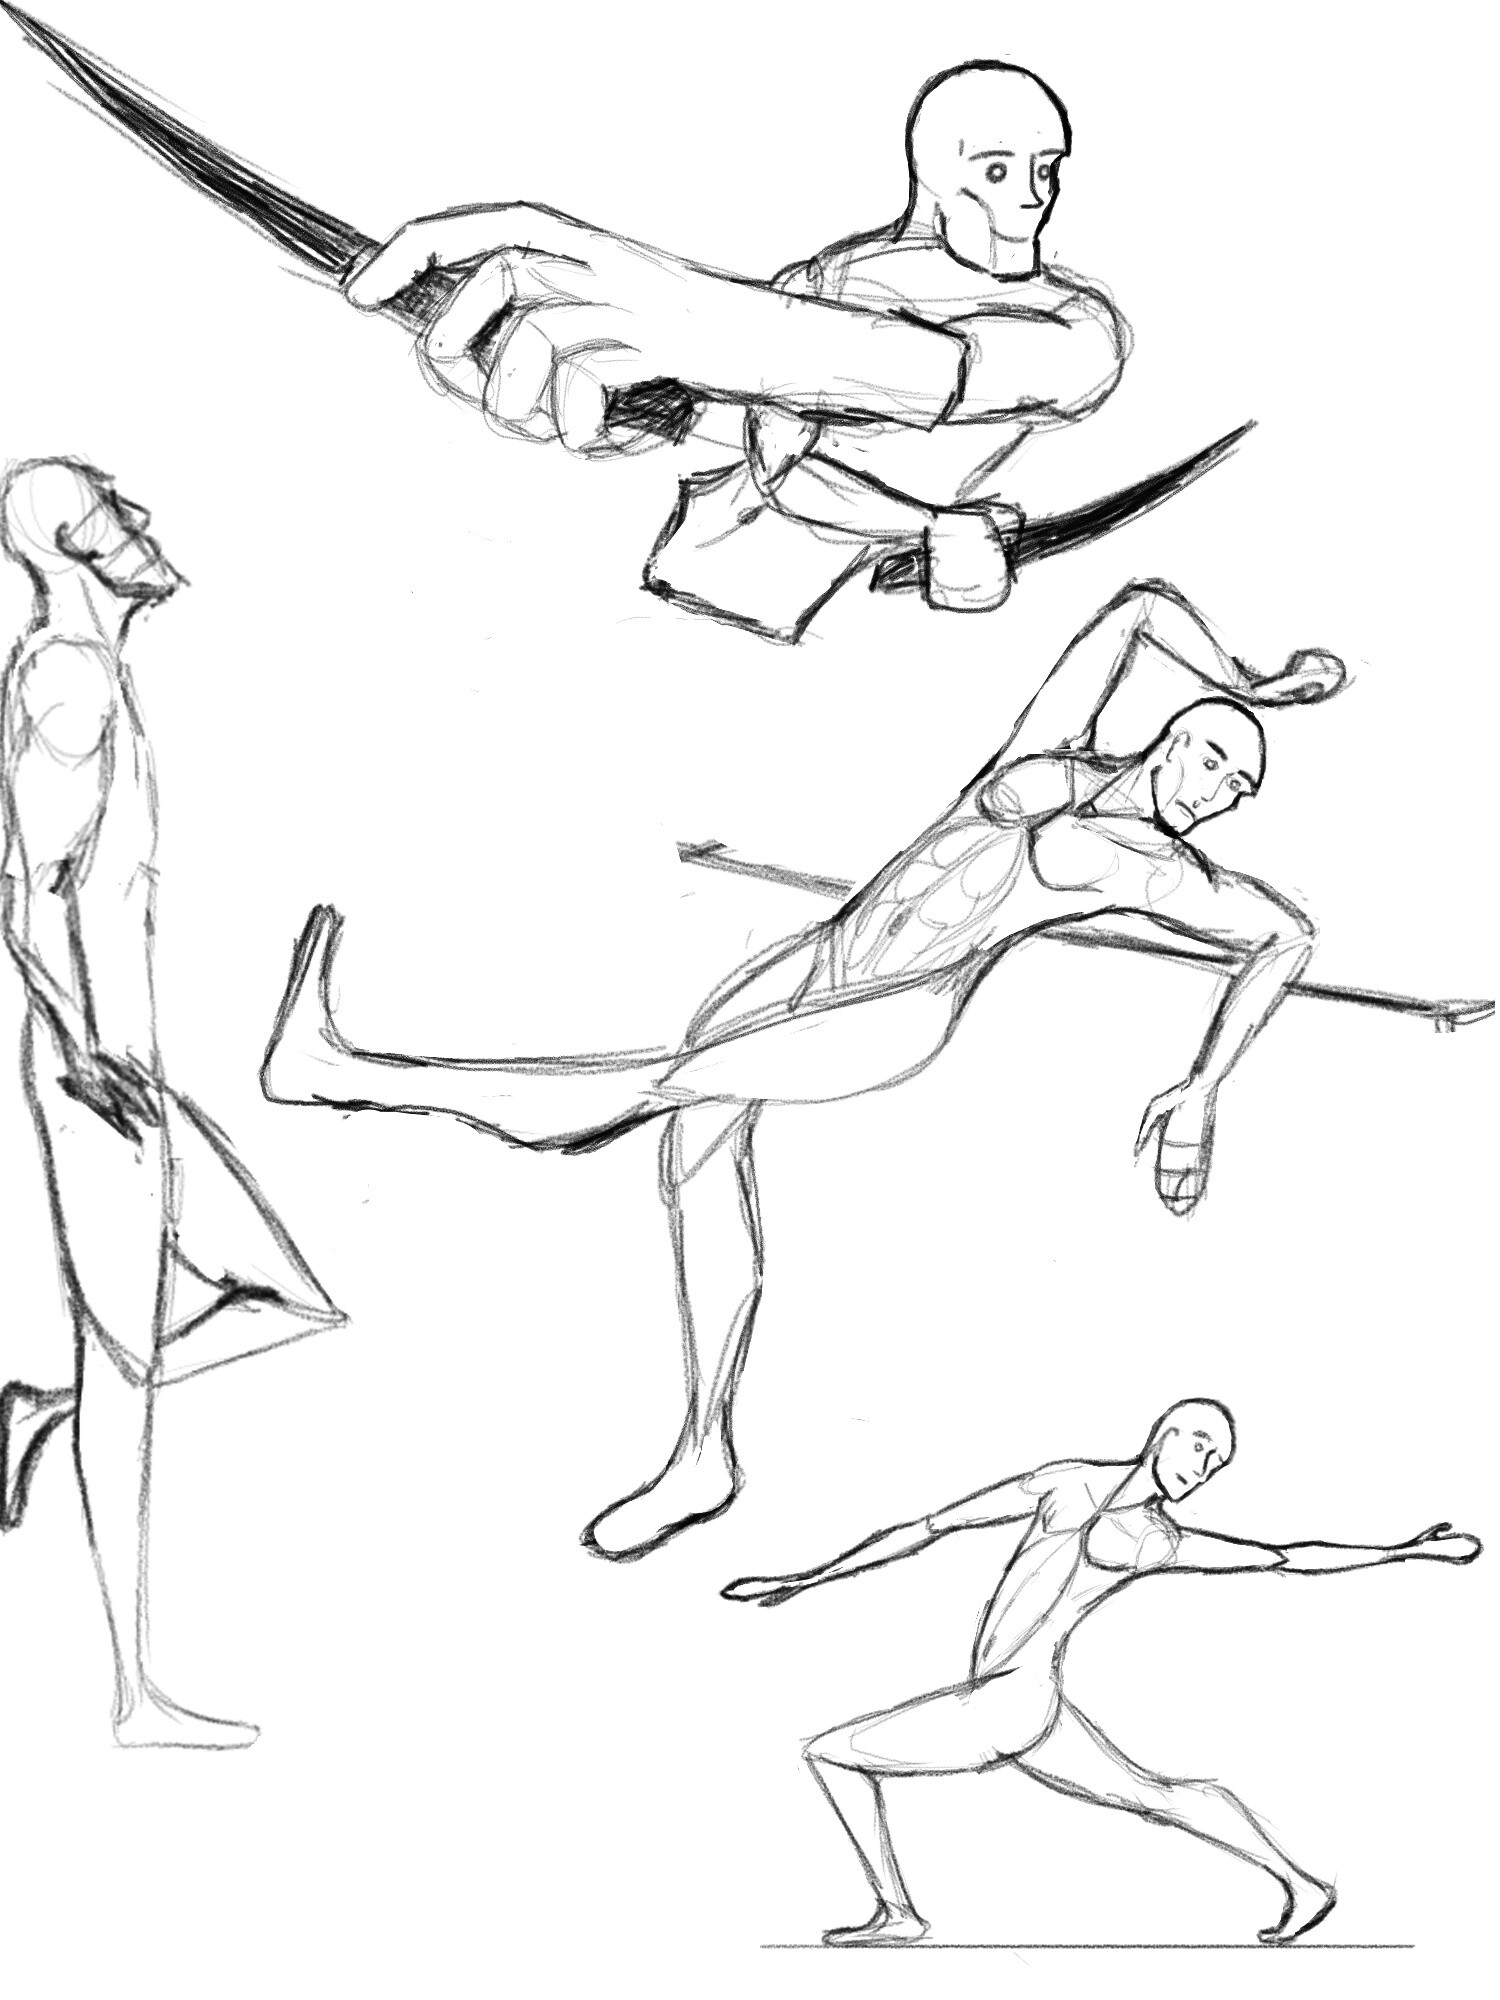 ArtStation - No reference pose sketches